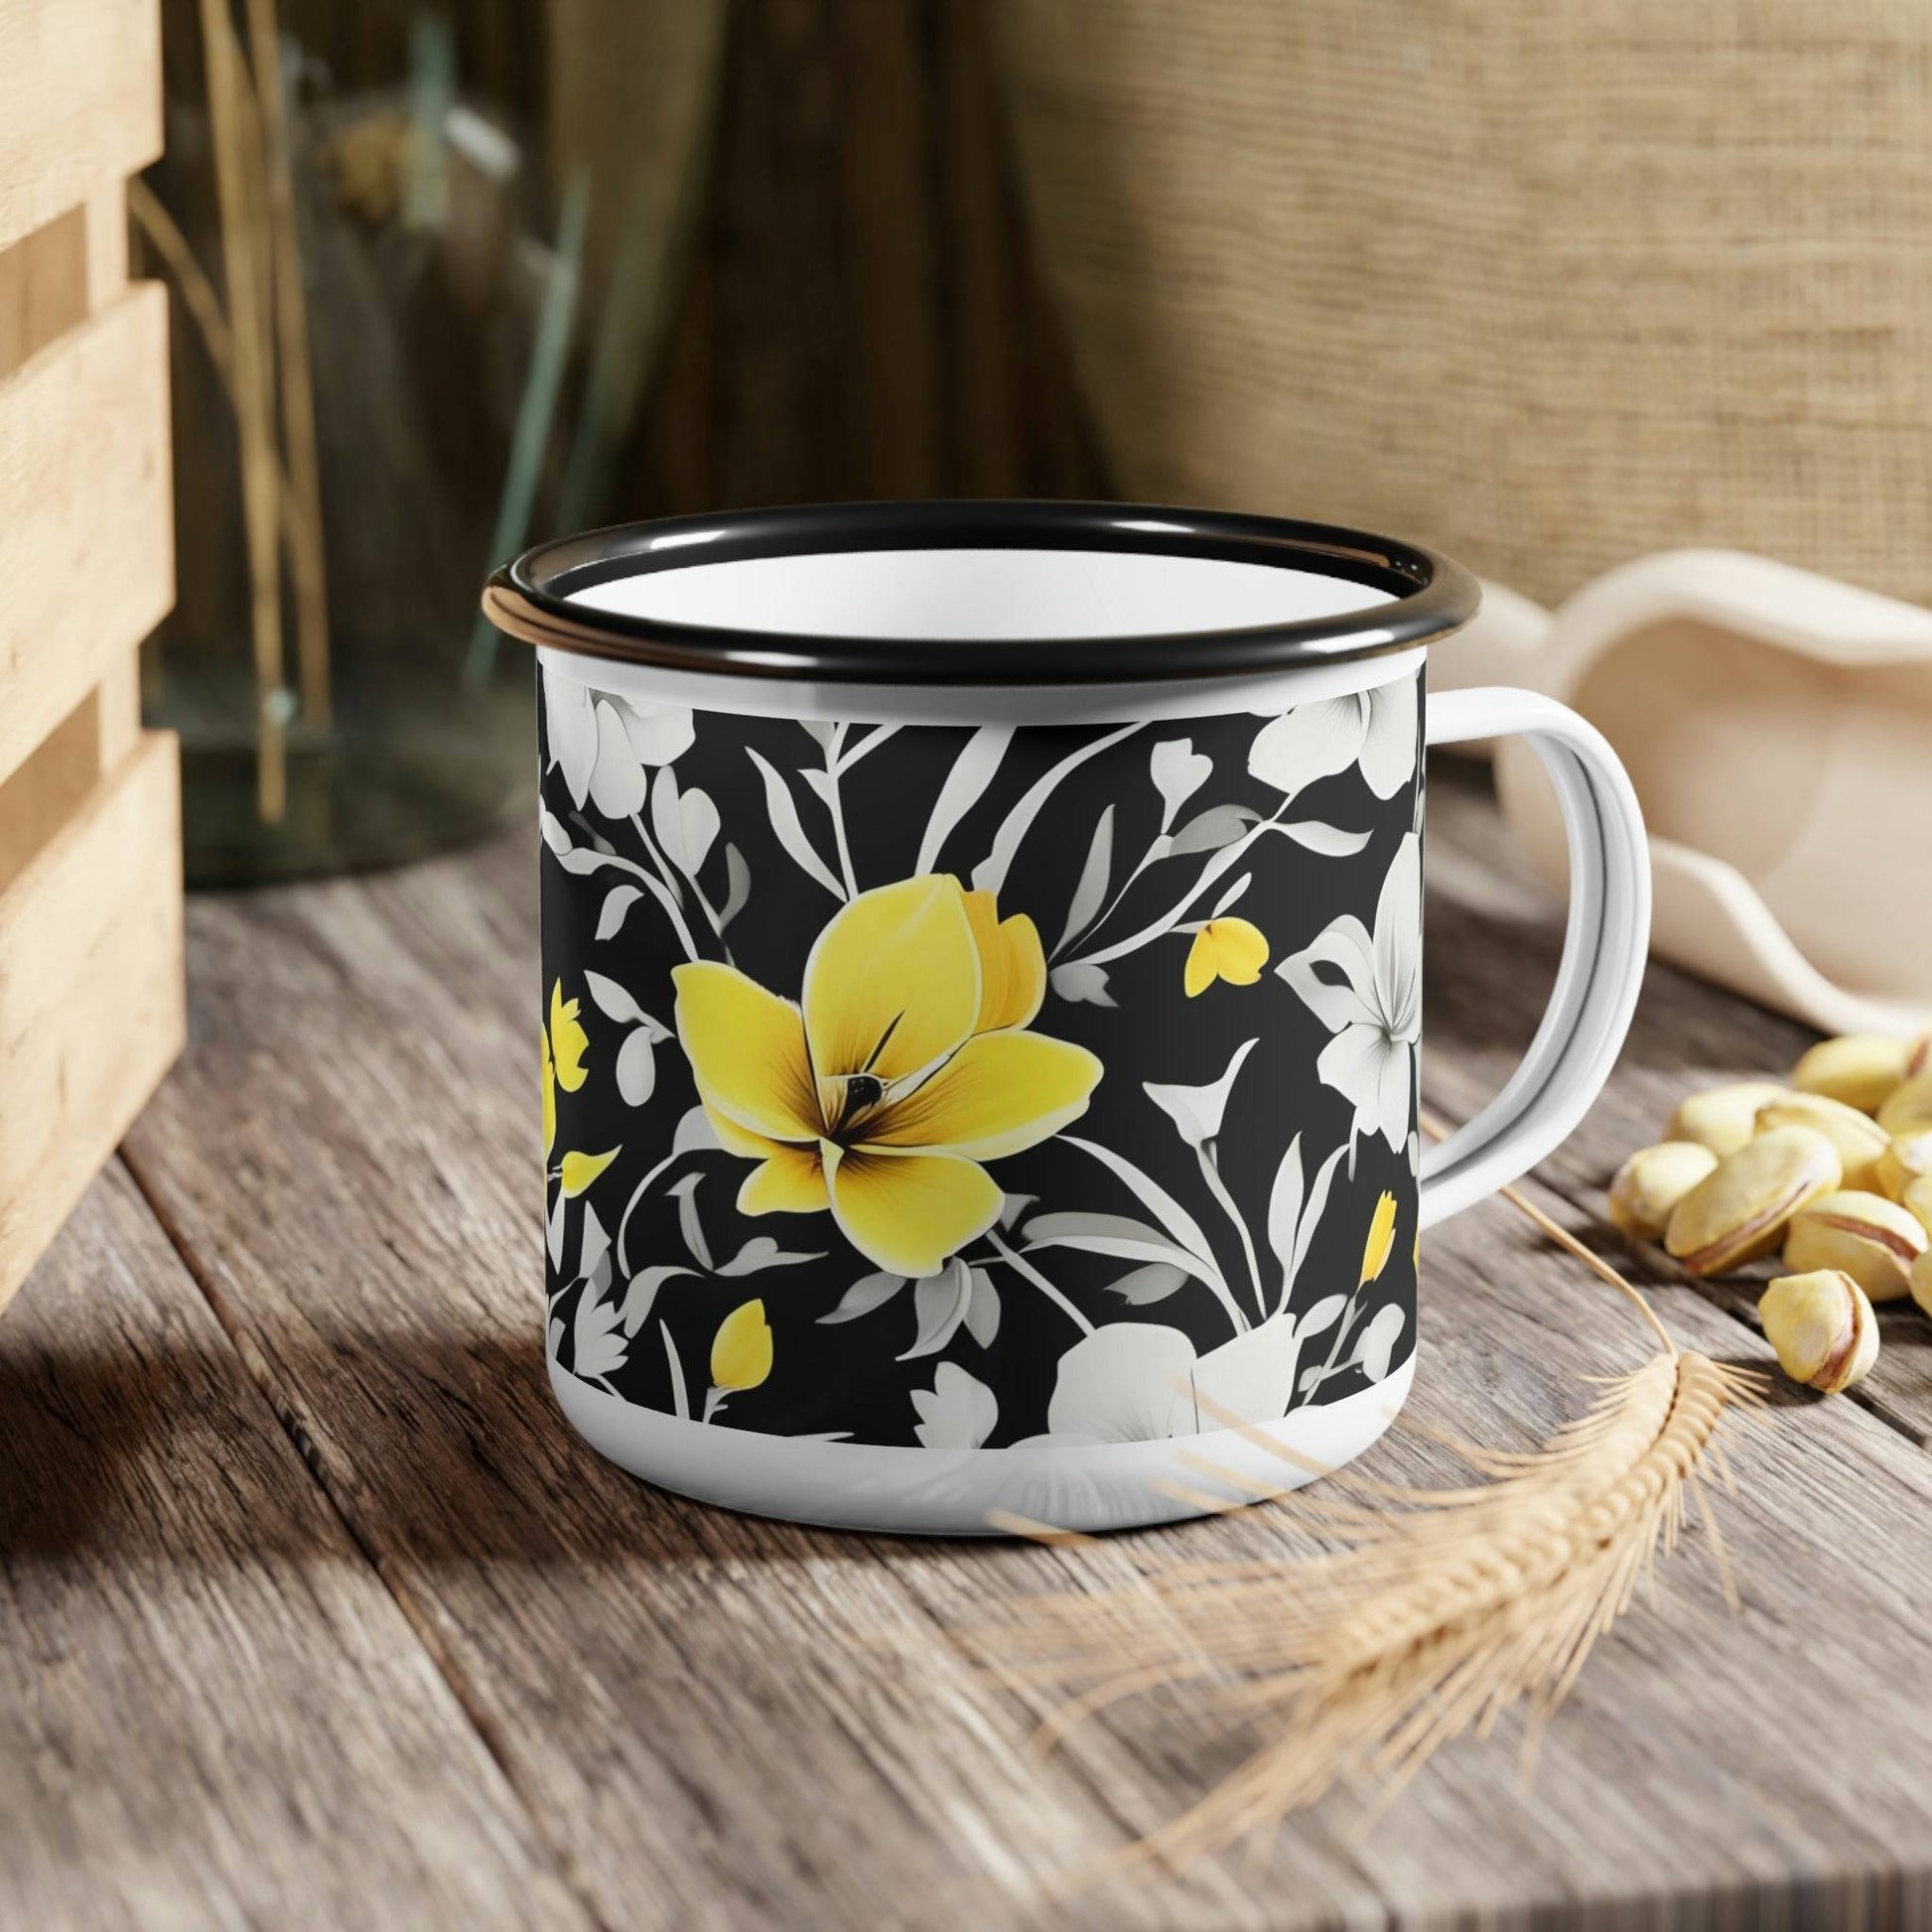 Enamel Camping Mug for Coffee, Tea, Hot Cocoa, Cereal, 12oz, Yellow Flowers